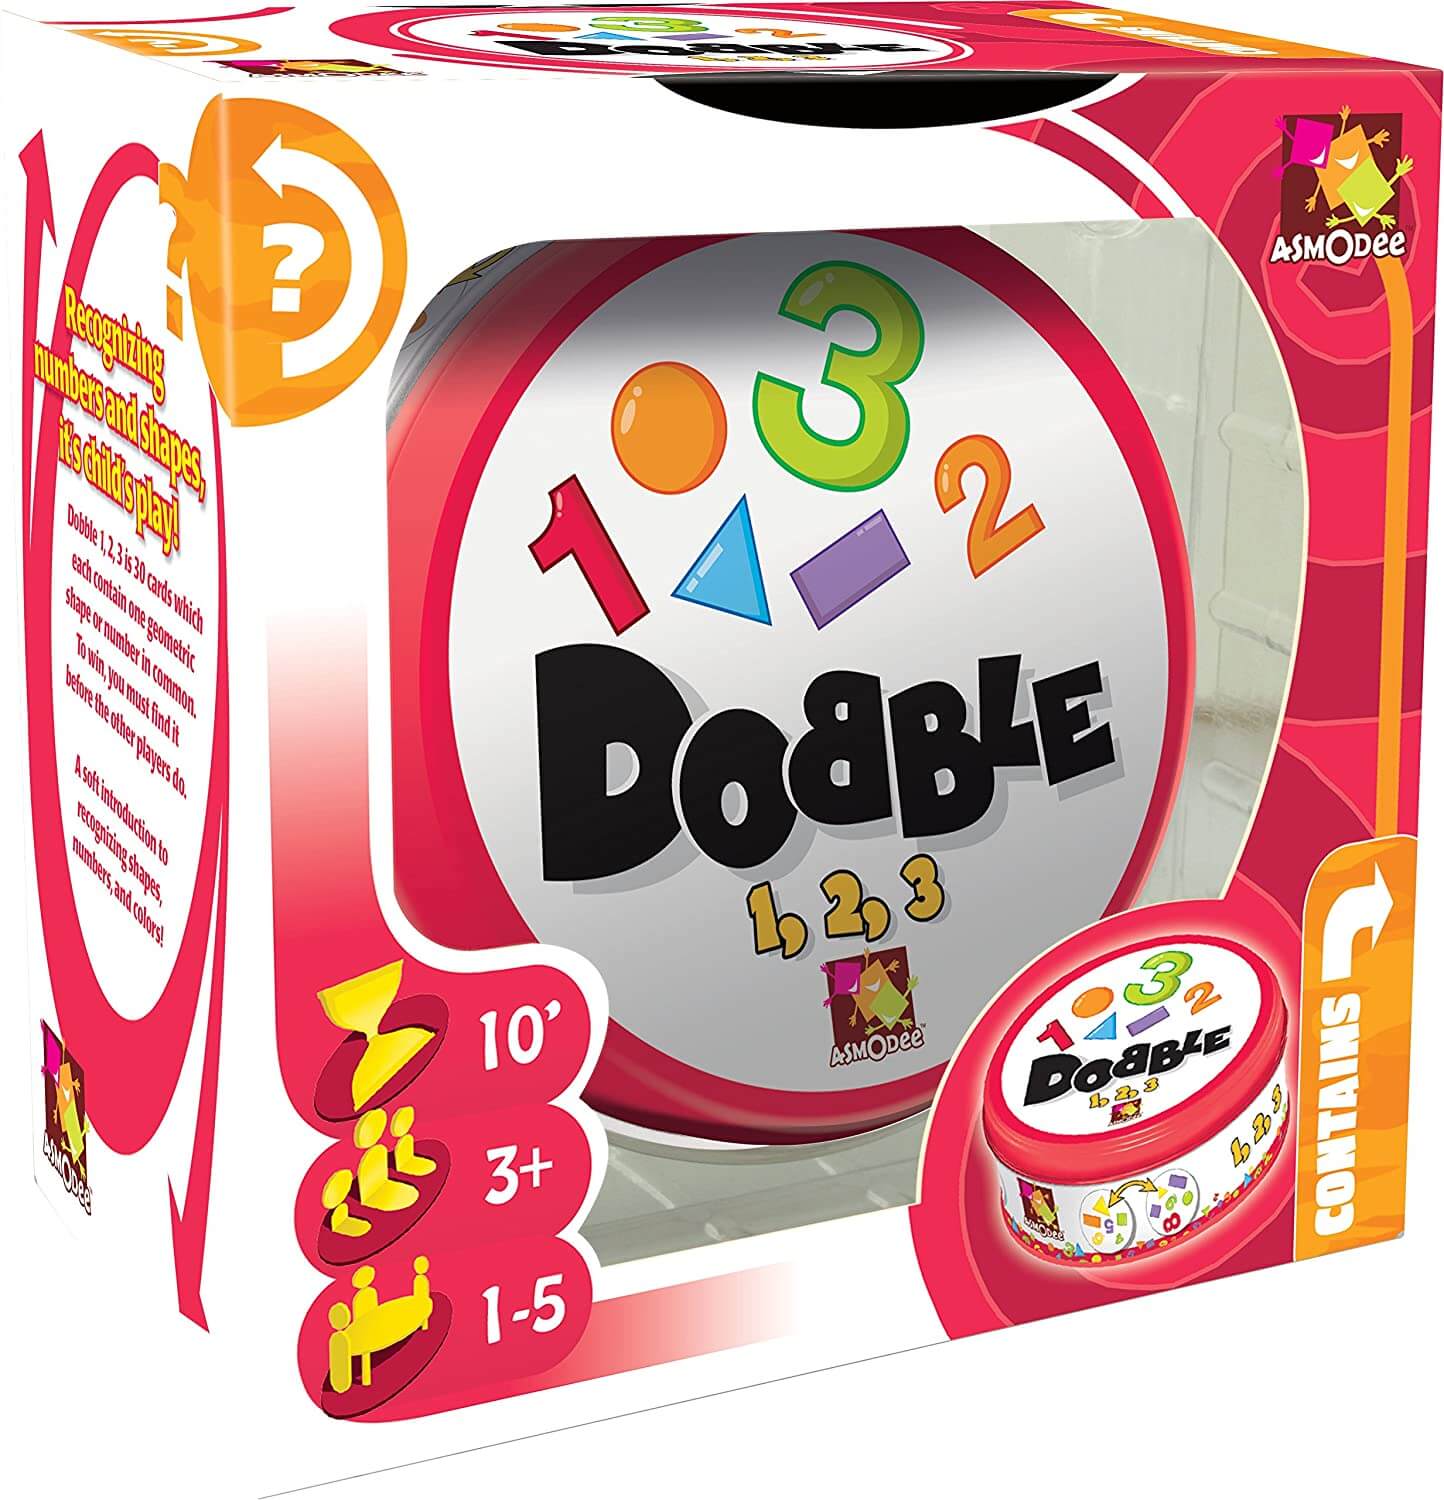 What is Dobble? 